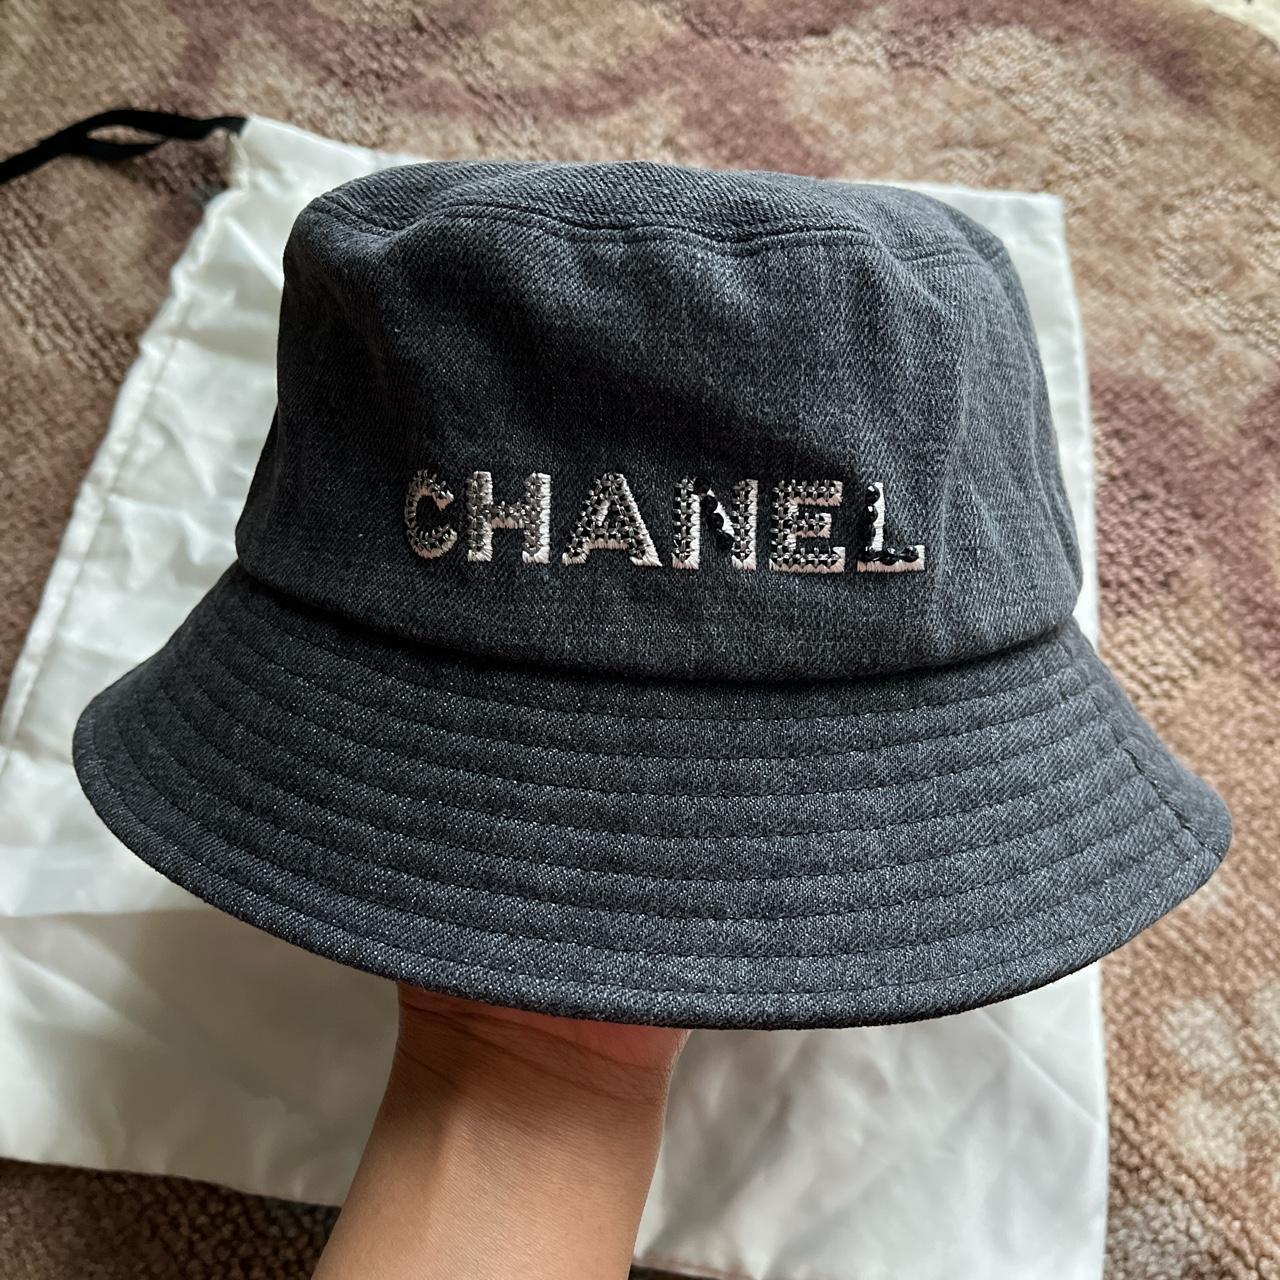 Women's Chanel Hats, New & Used